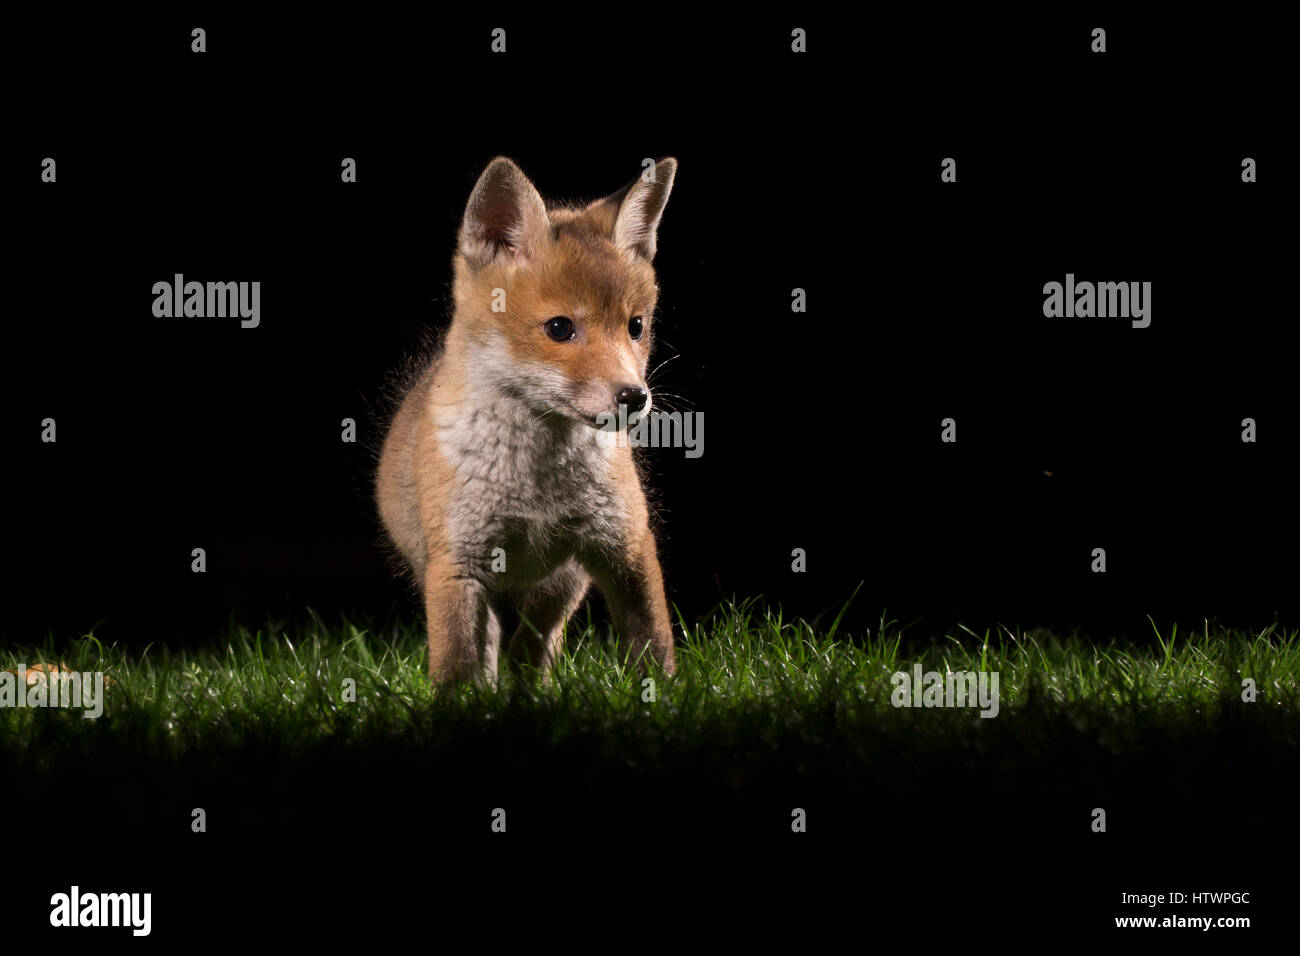 Fox cubs playing in a garden at night Stock Photo